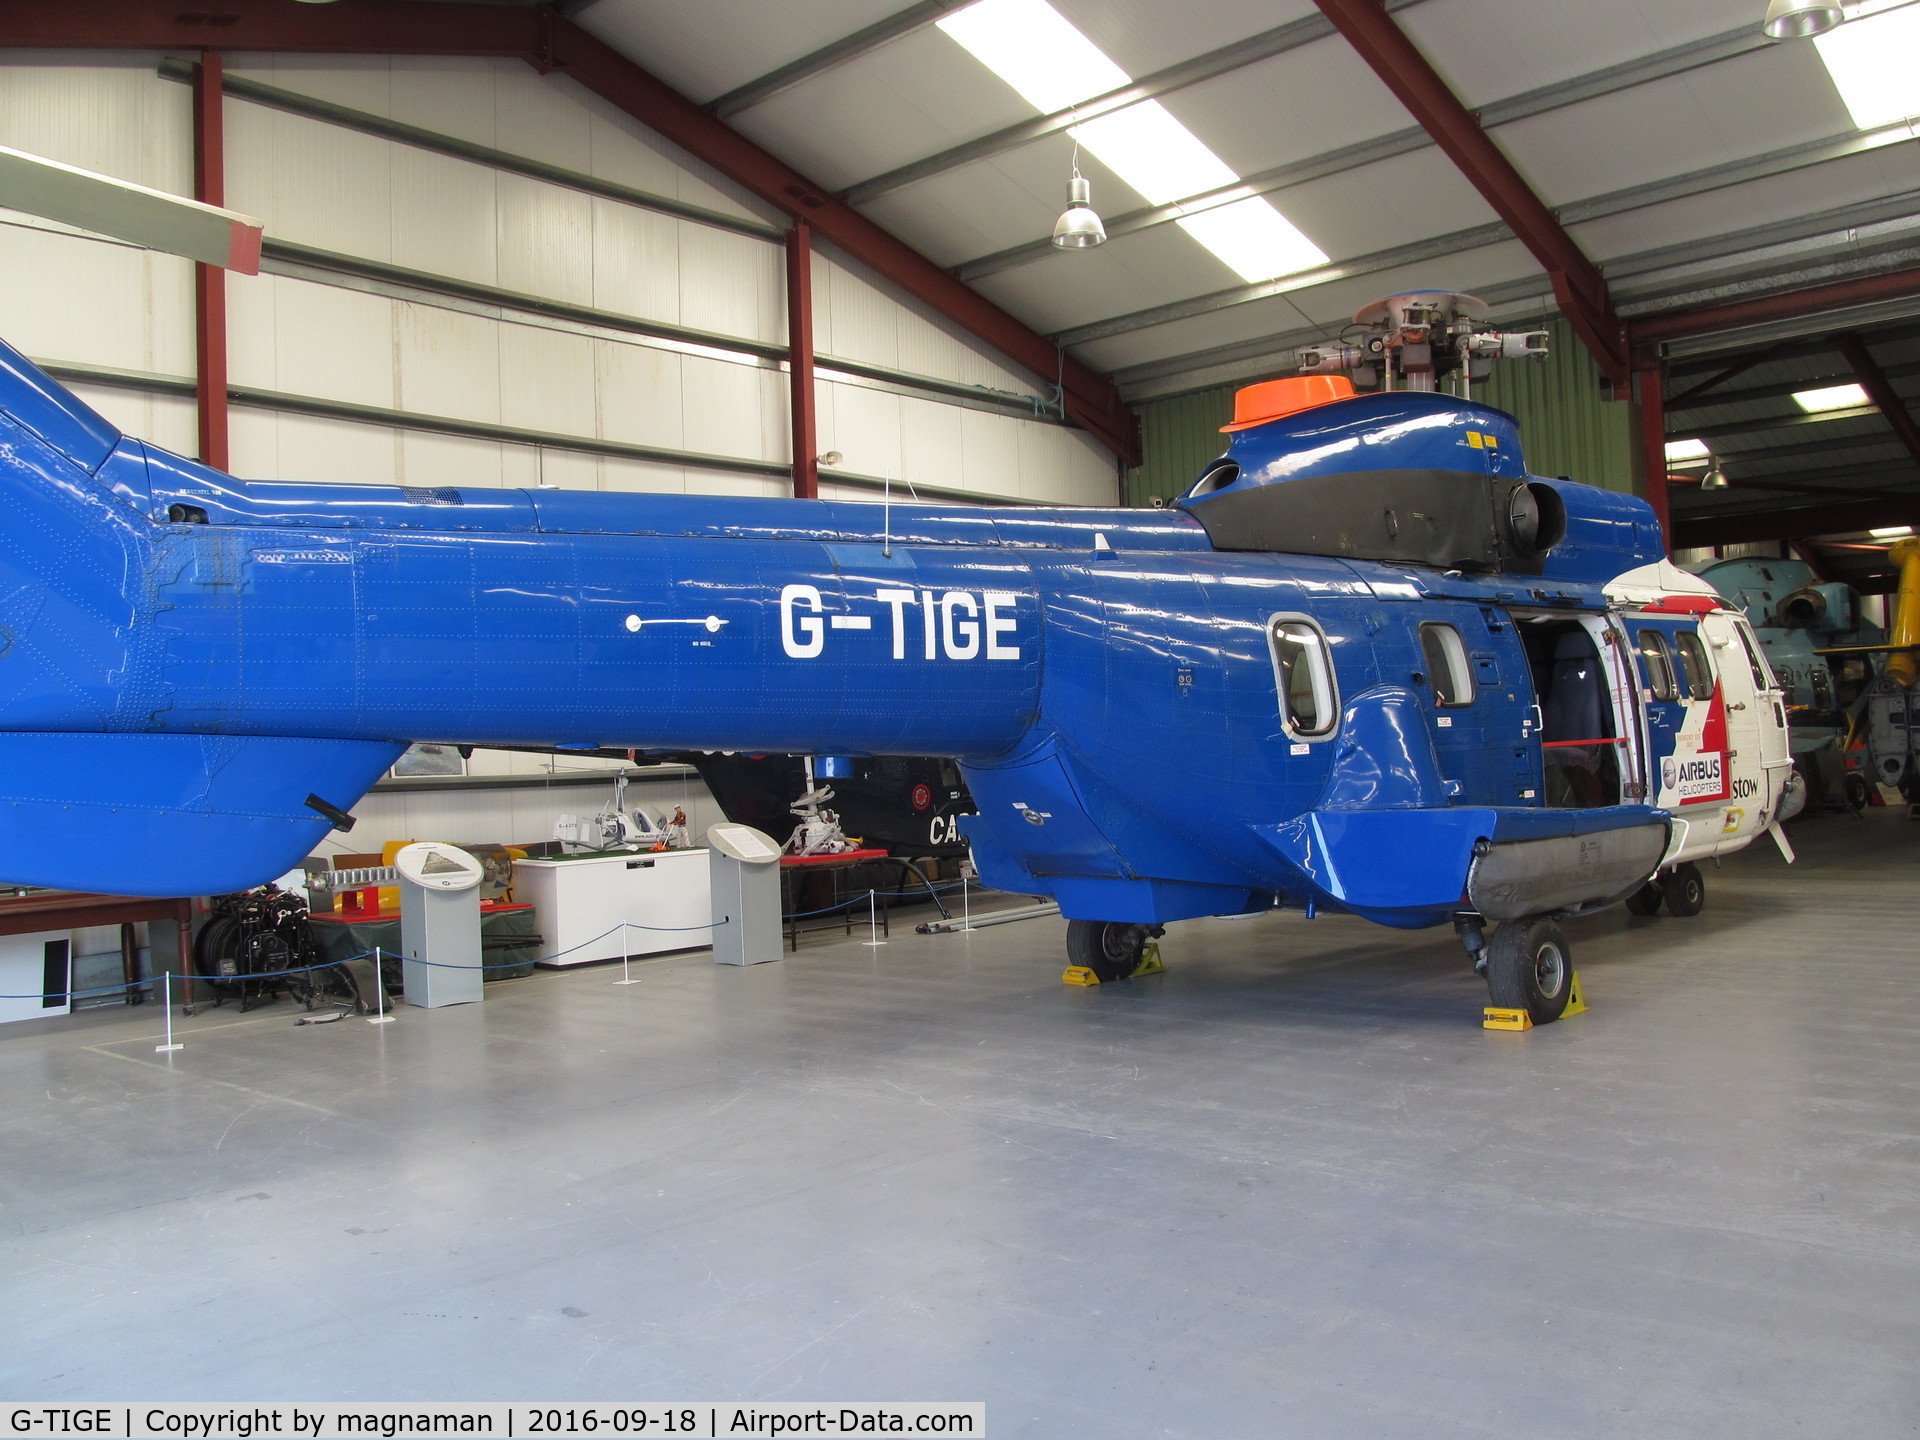 G-TIGE, 1982 Aerospatiale AS-332L Super Puma C/N 2028, this angle makes the tail look very long